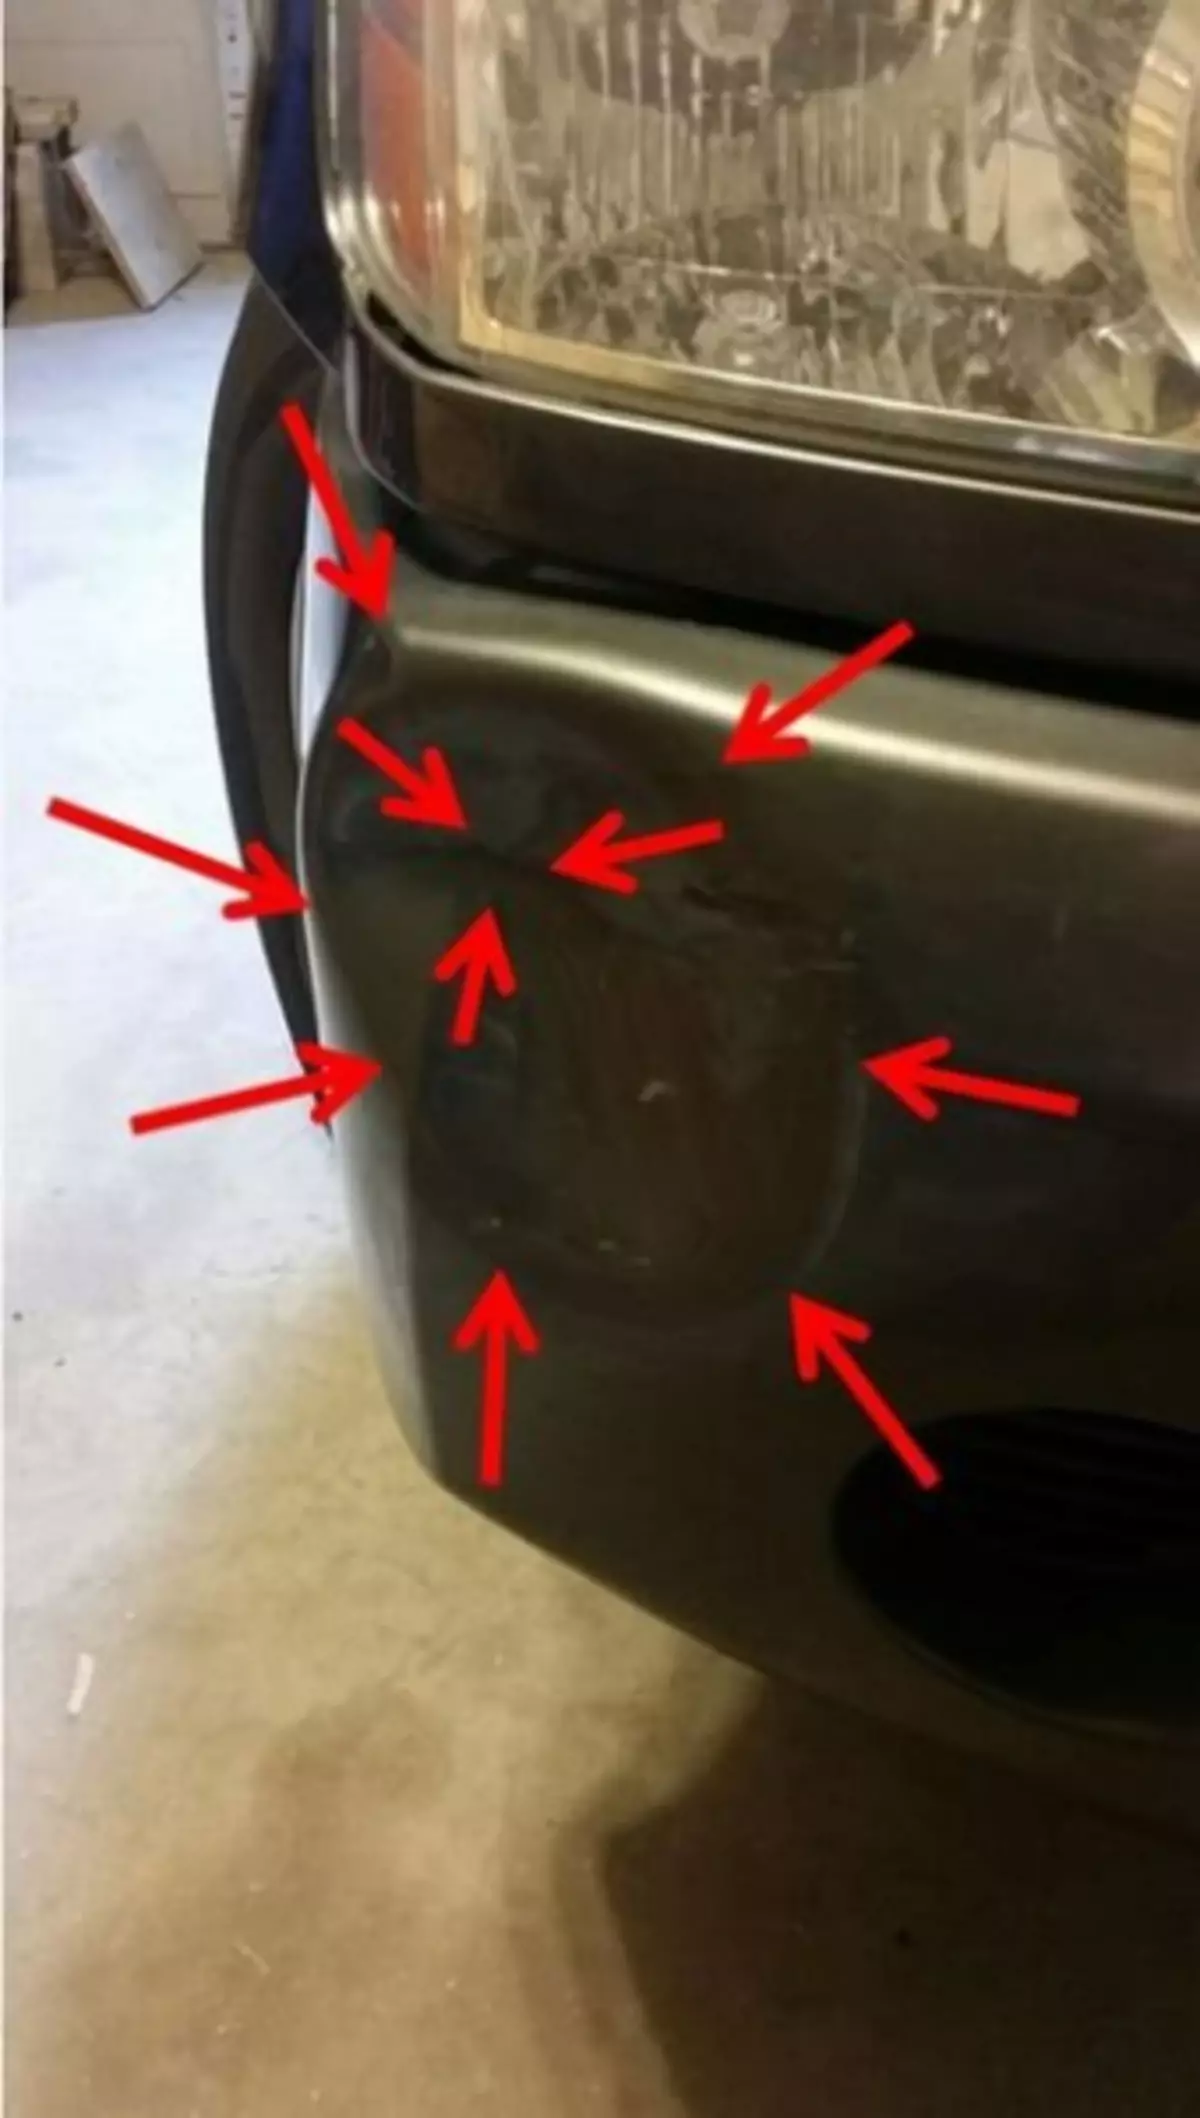 How to remove dent on the plastic bumper